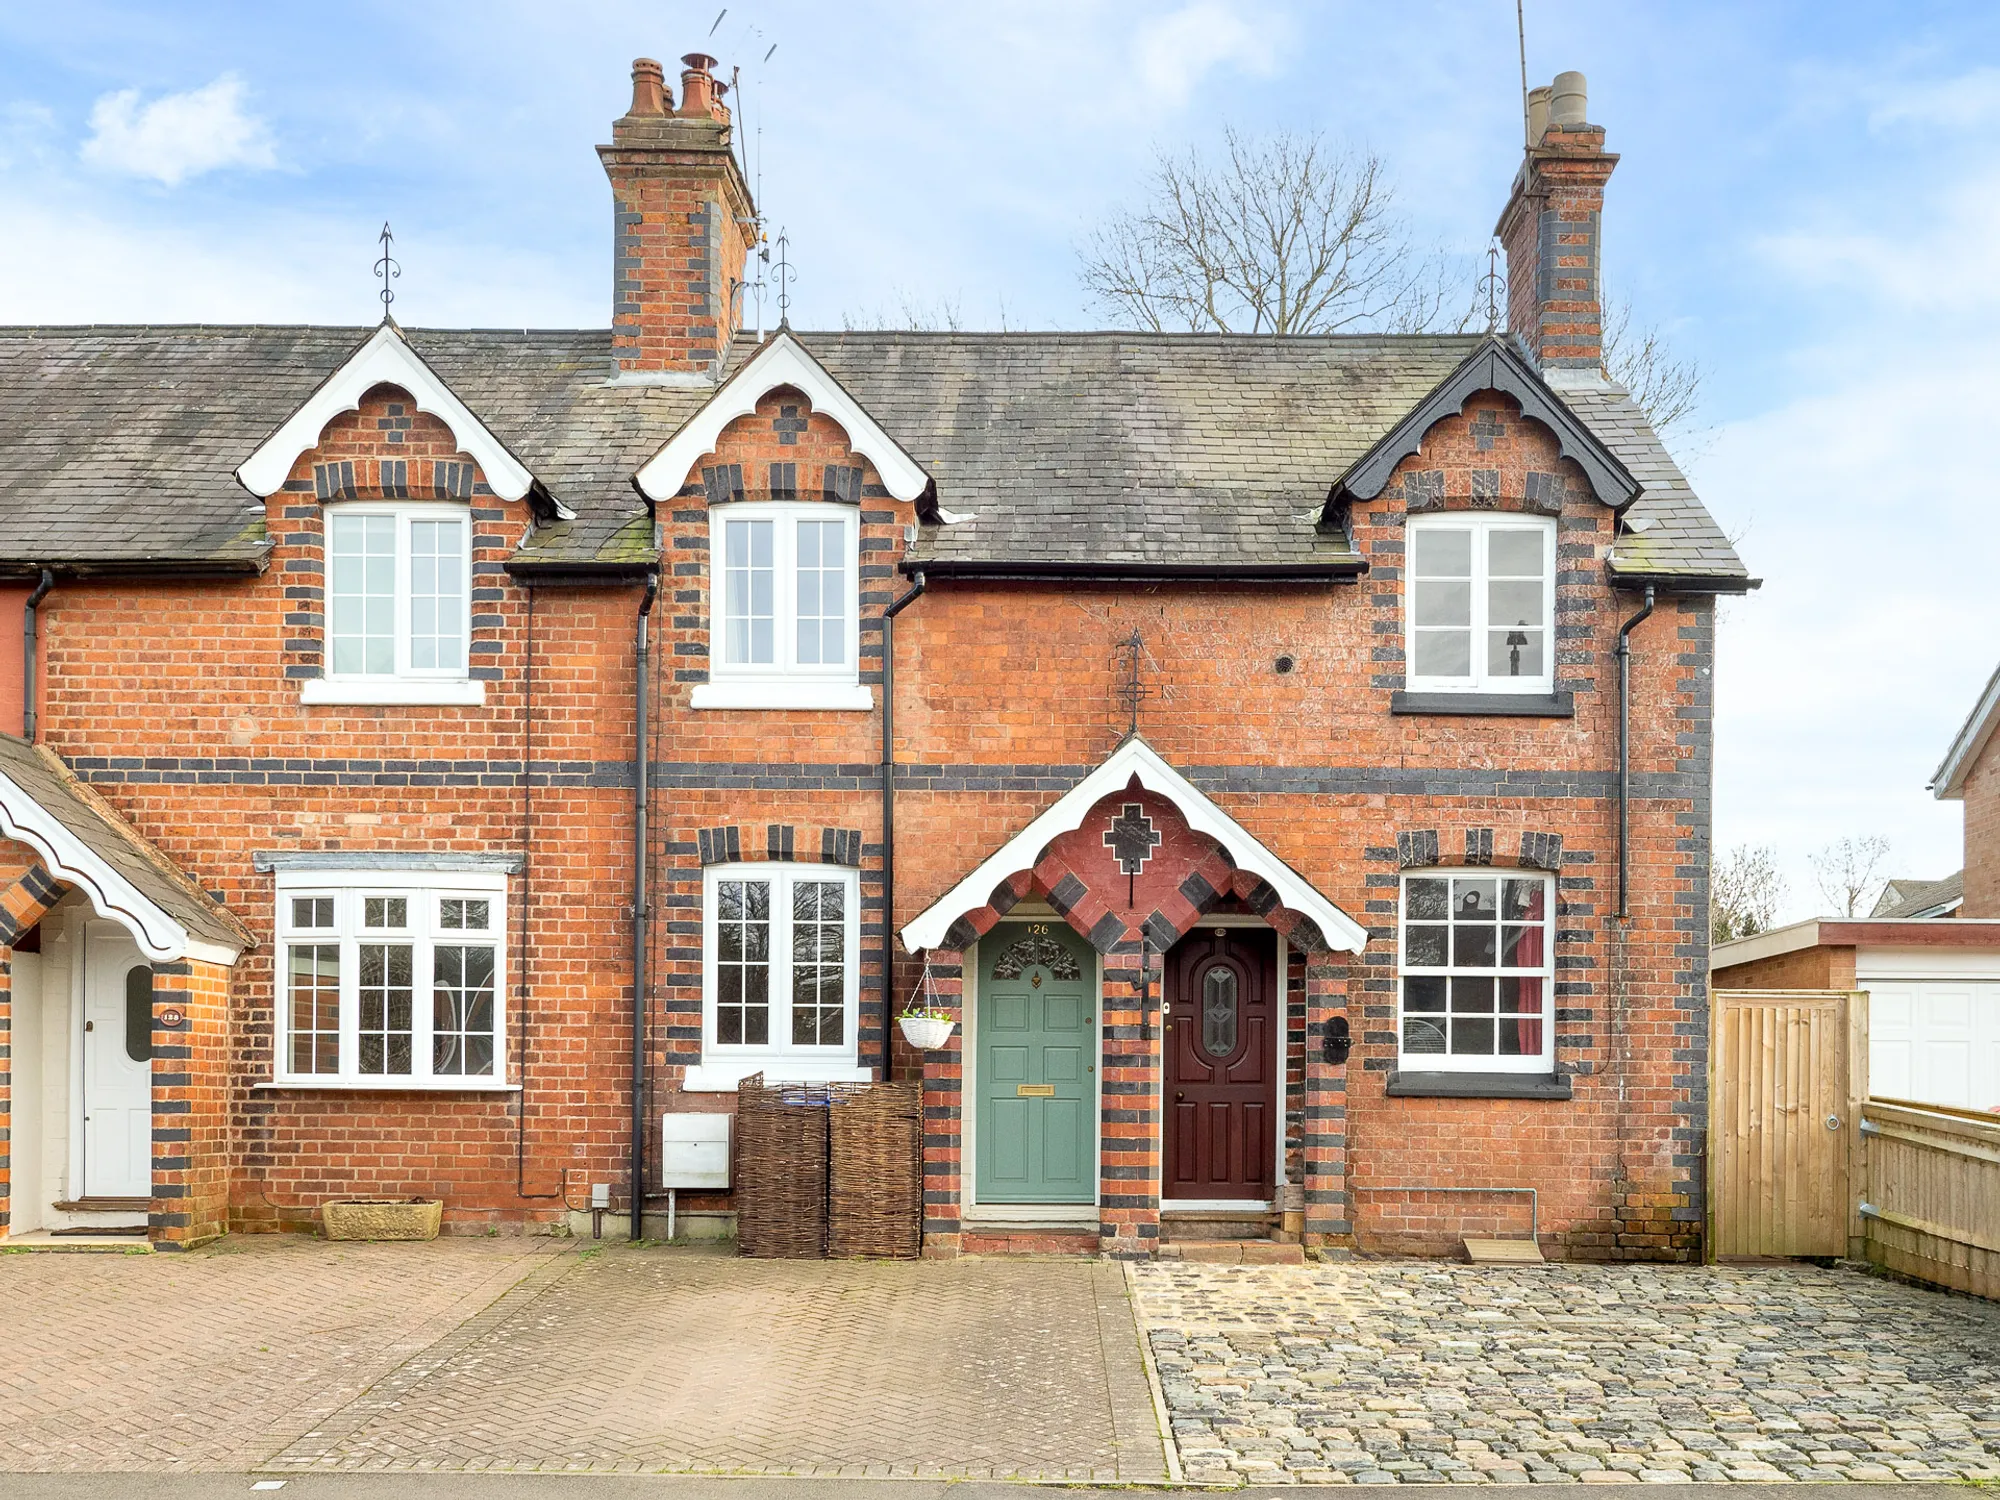 2 bed terraced house for sale in School Lane, Kenilworth - Property Image 1